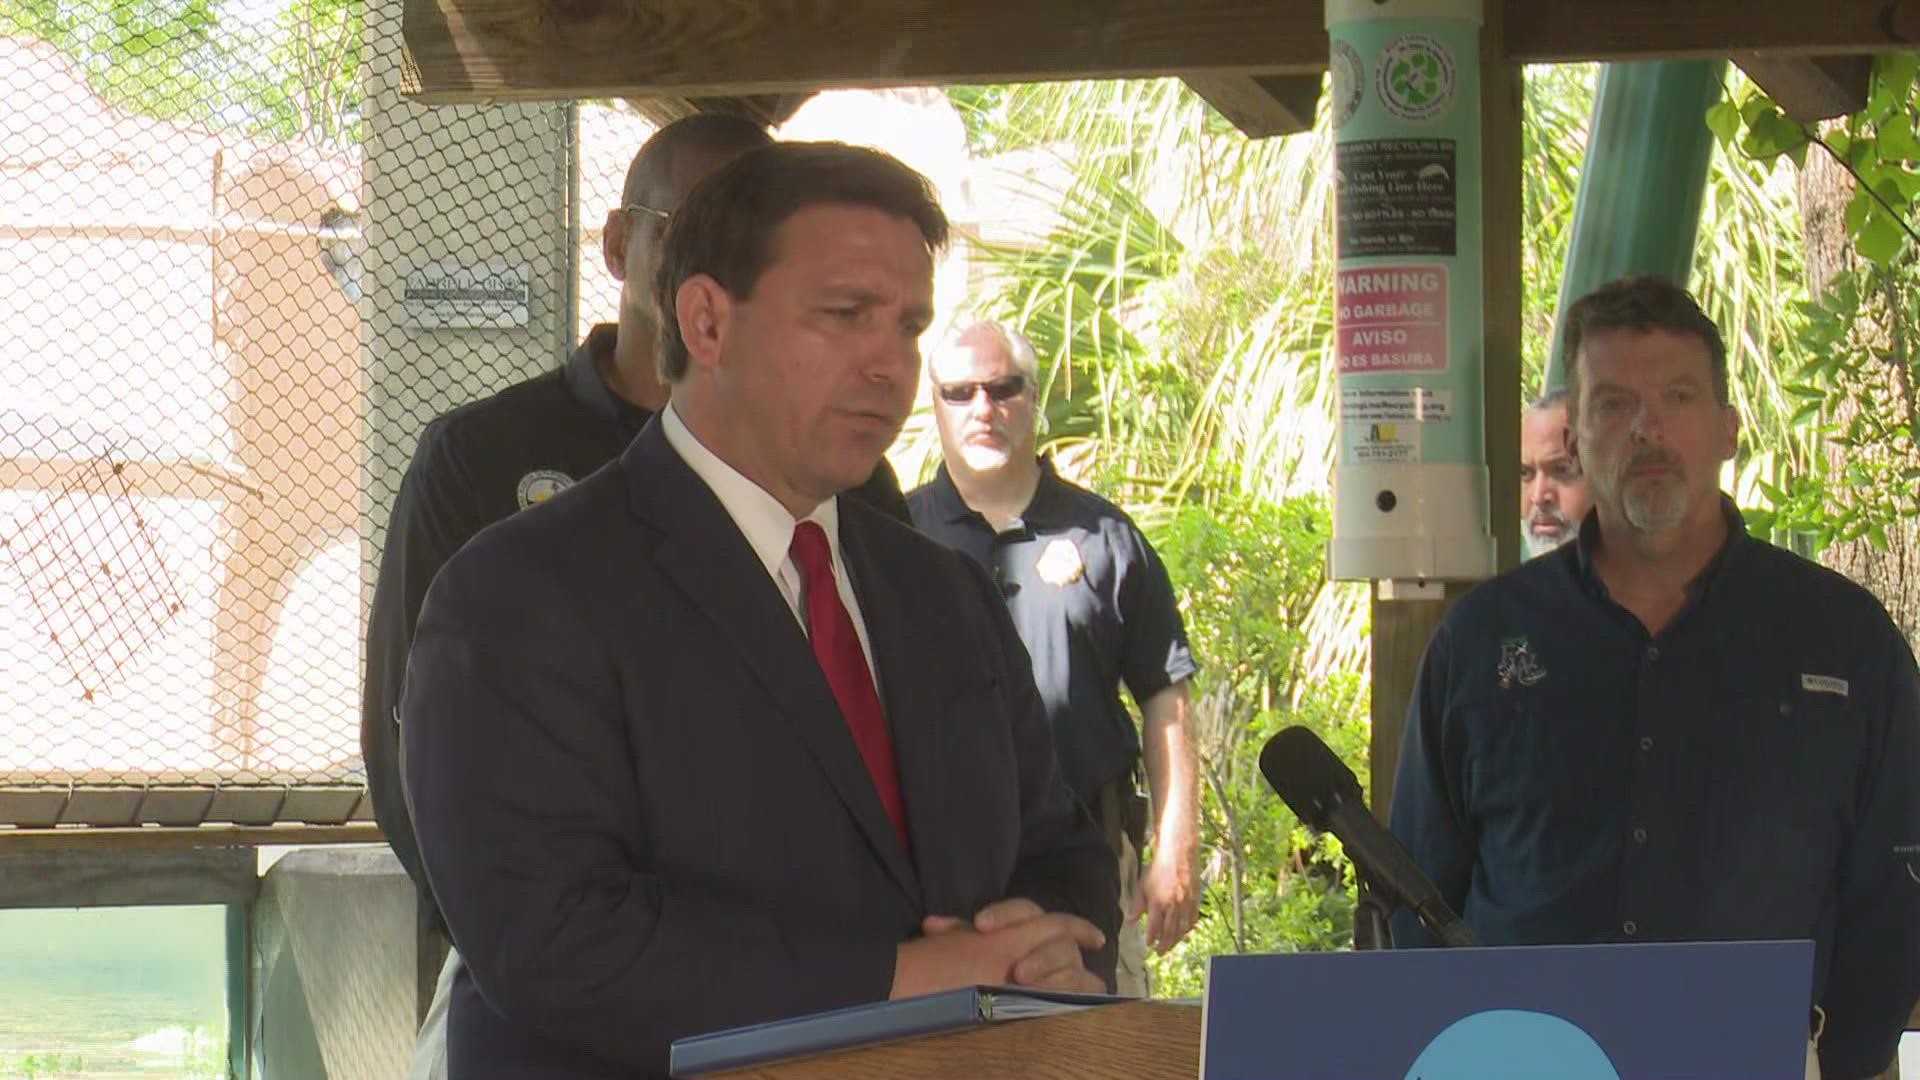 Gov. Ron DeSantis announced at a press conference at the Jacksonville Zoo & Gardens that the state will put money towards saving manatees and cleaning up waterways.